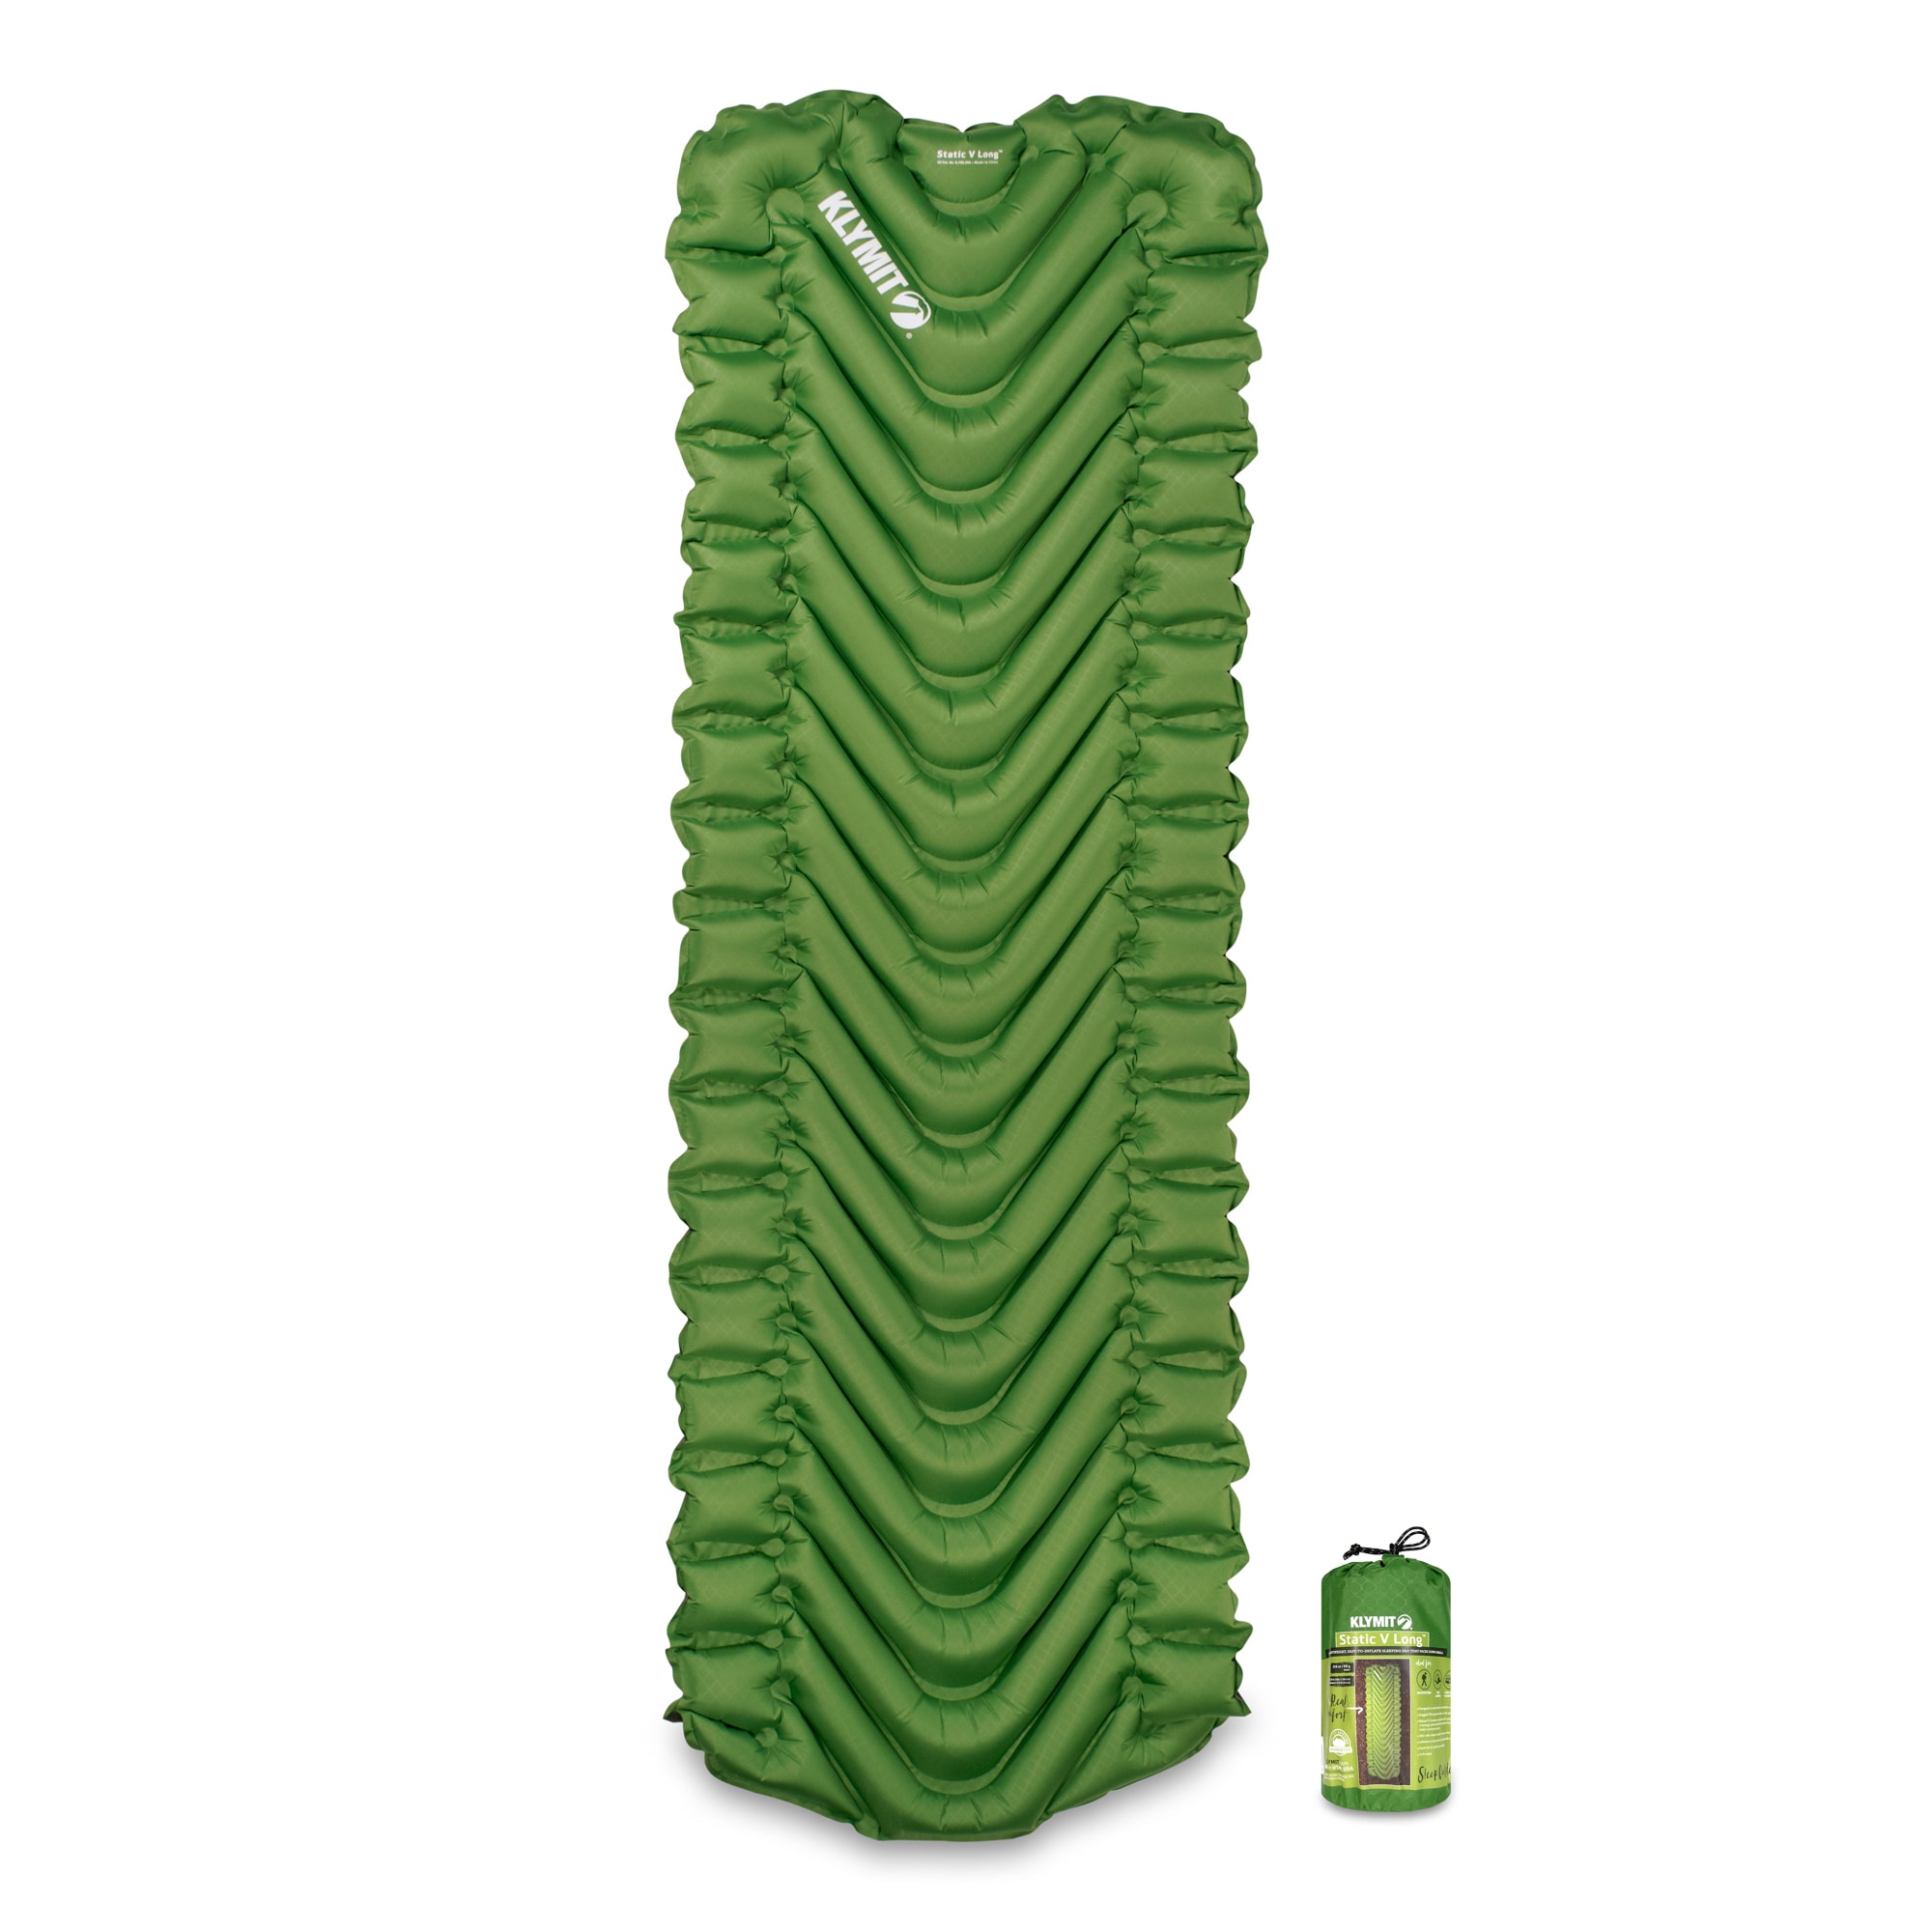 60 Inch Wide Sleeping Bags & Pads at